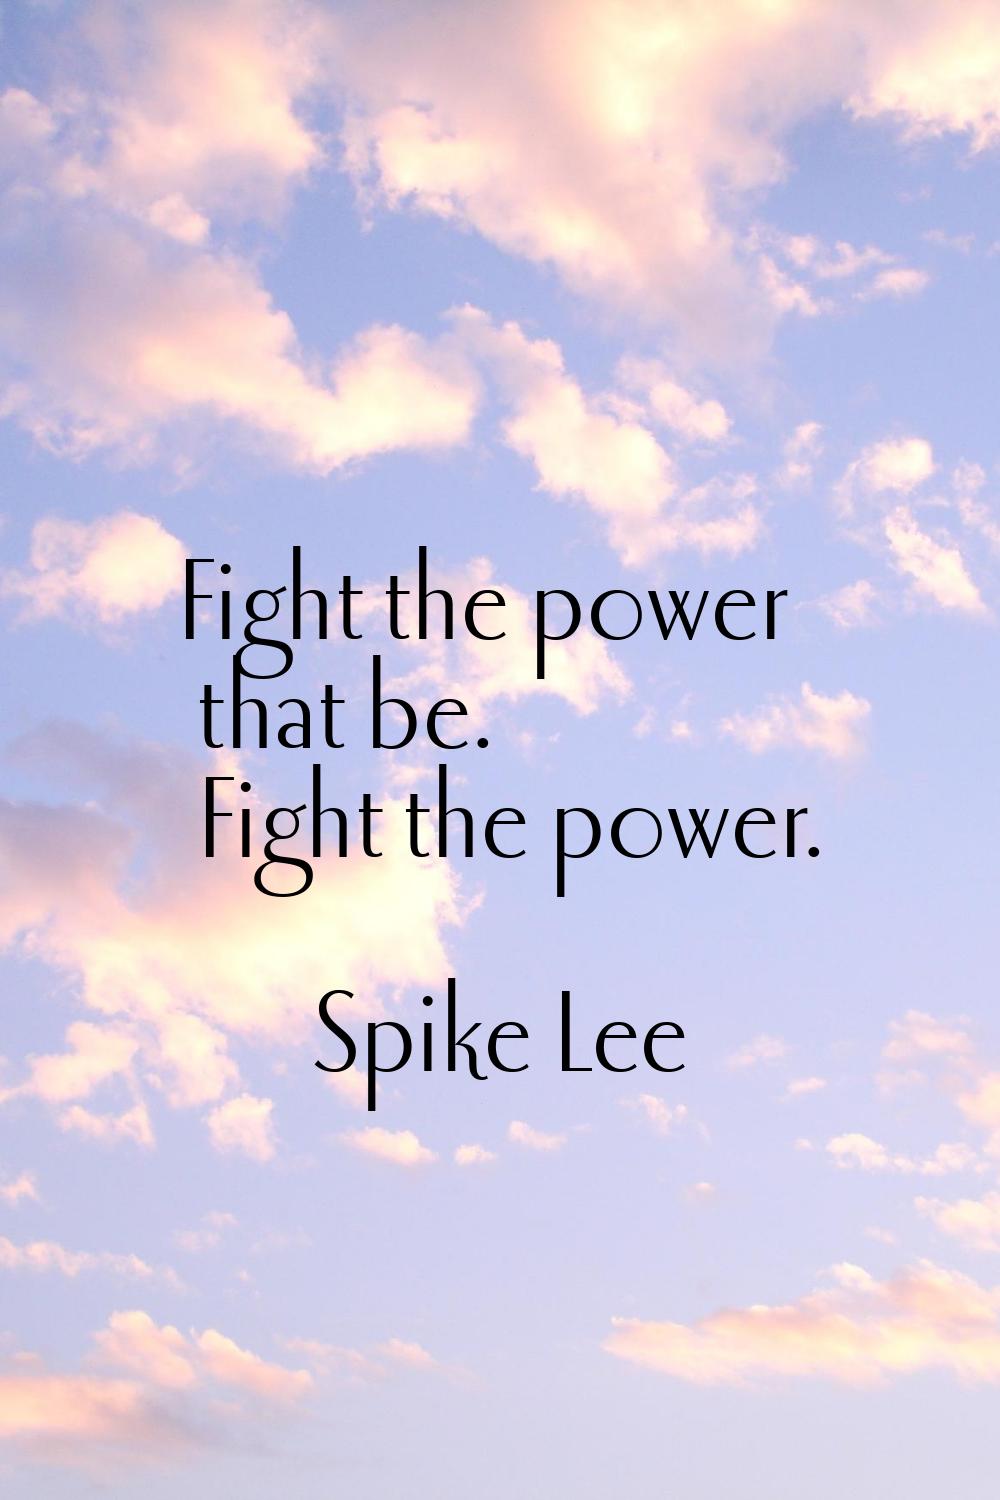 Fight the power that be. Fight the power.